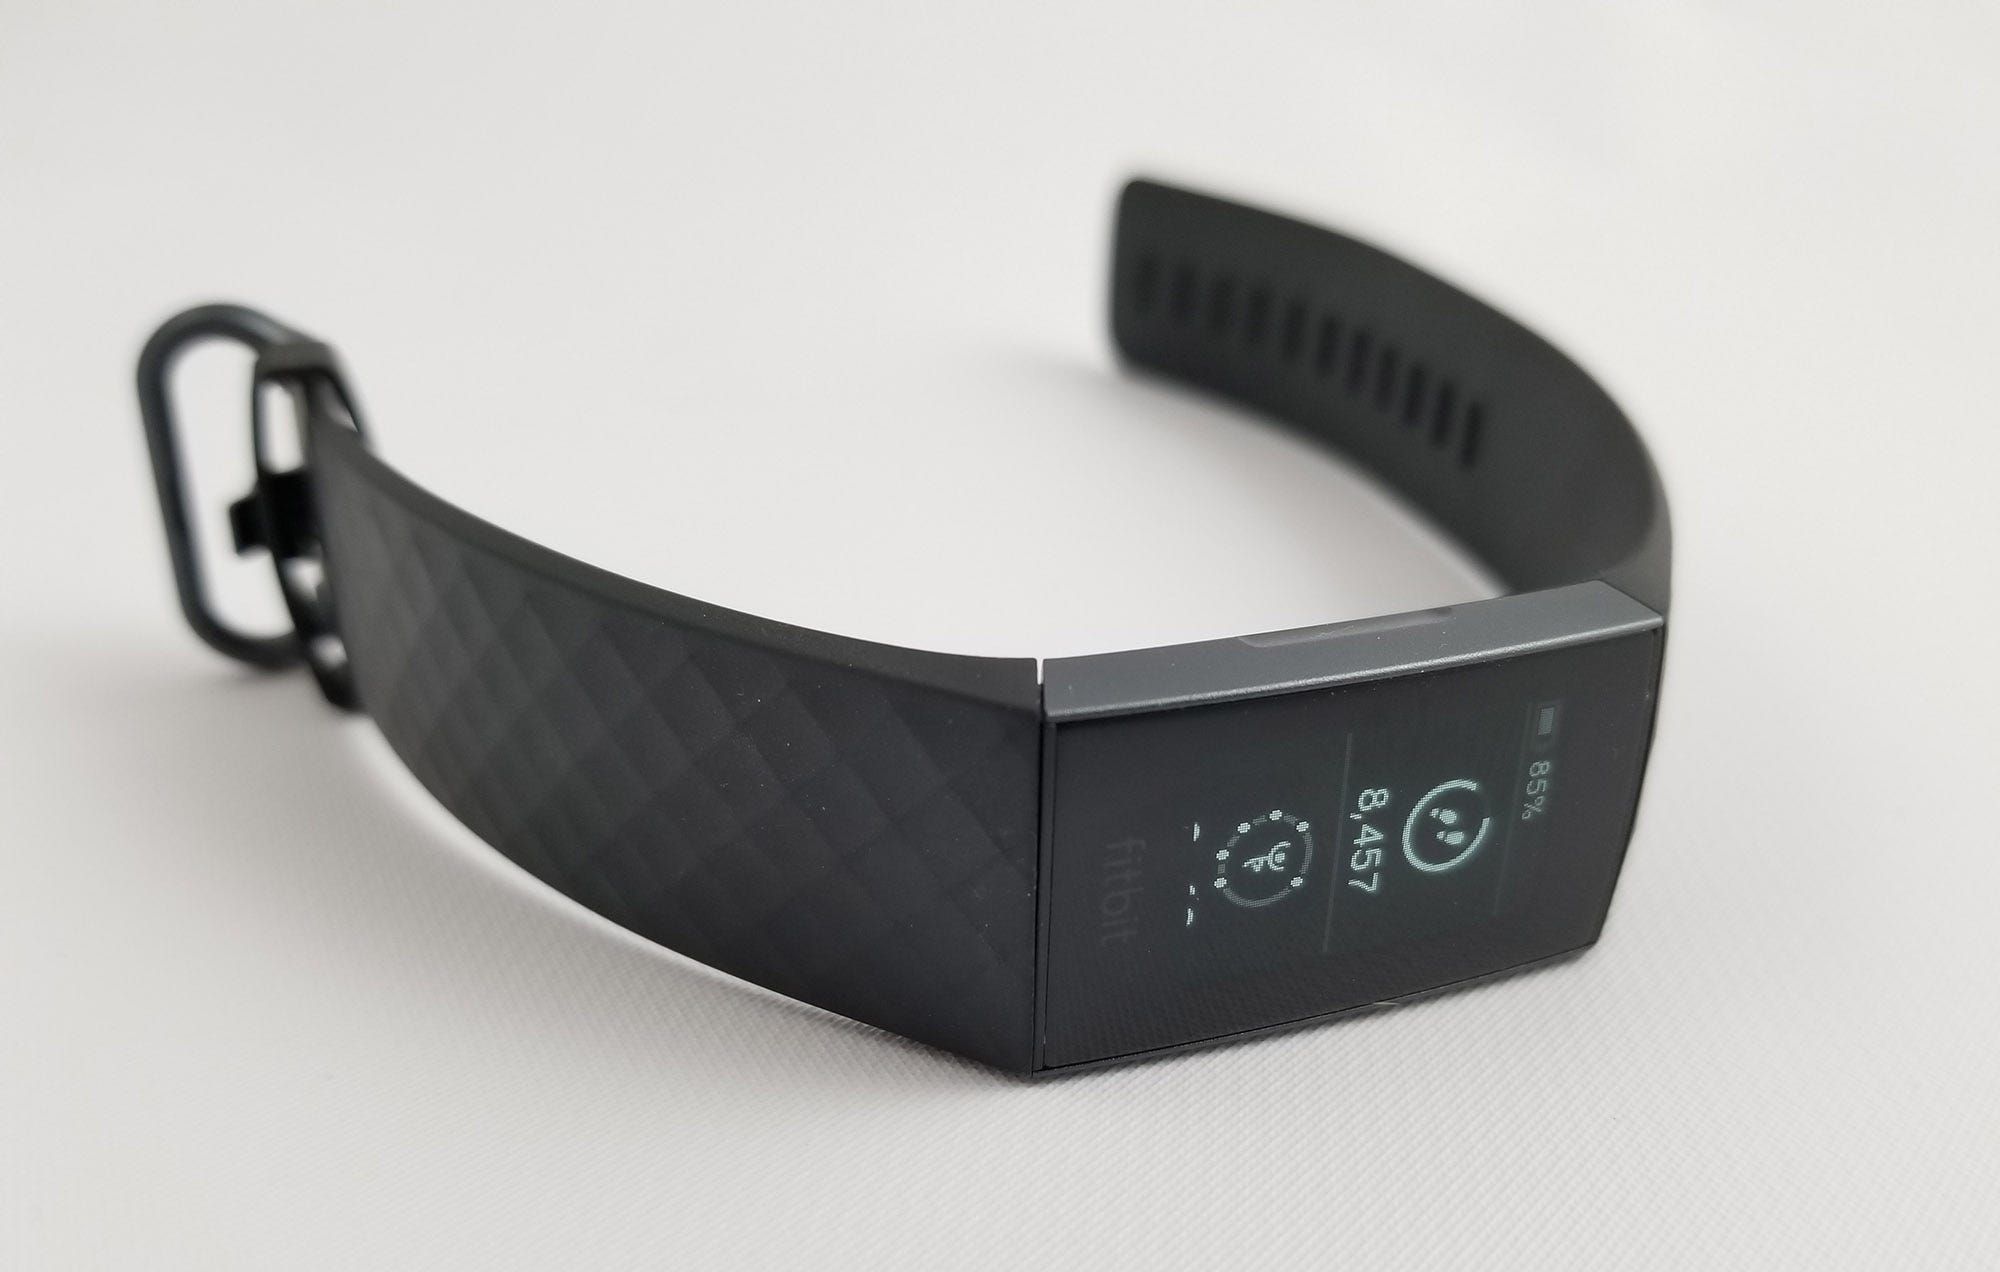 The Fitbit Charge 3 on a white background